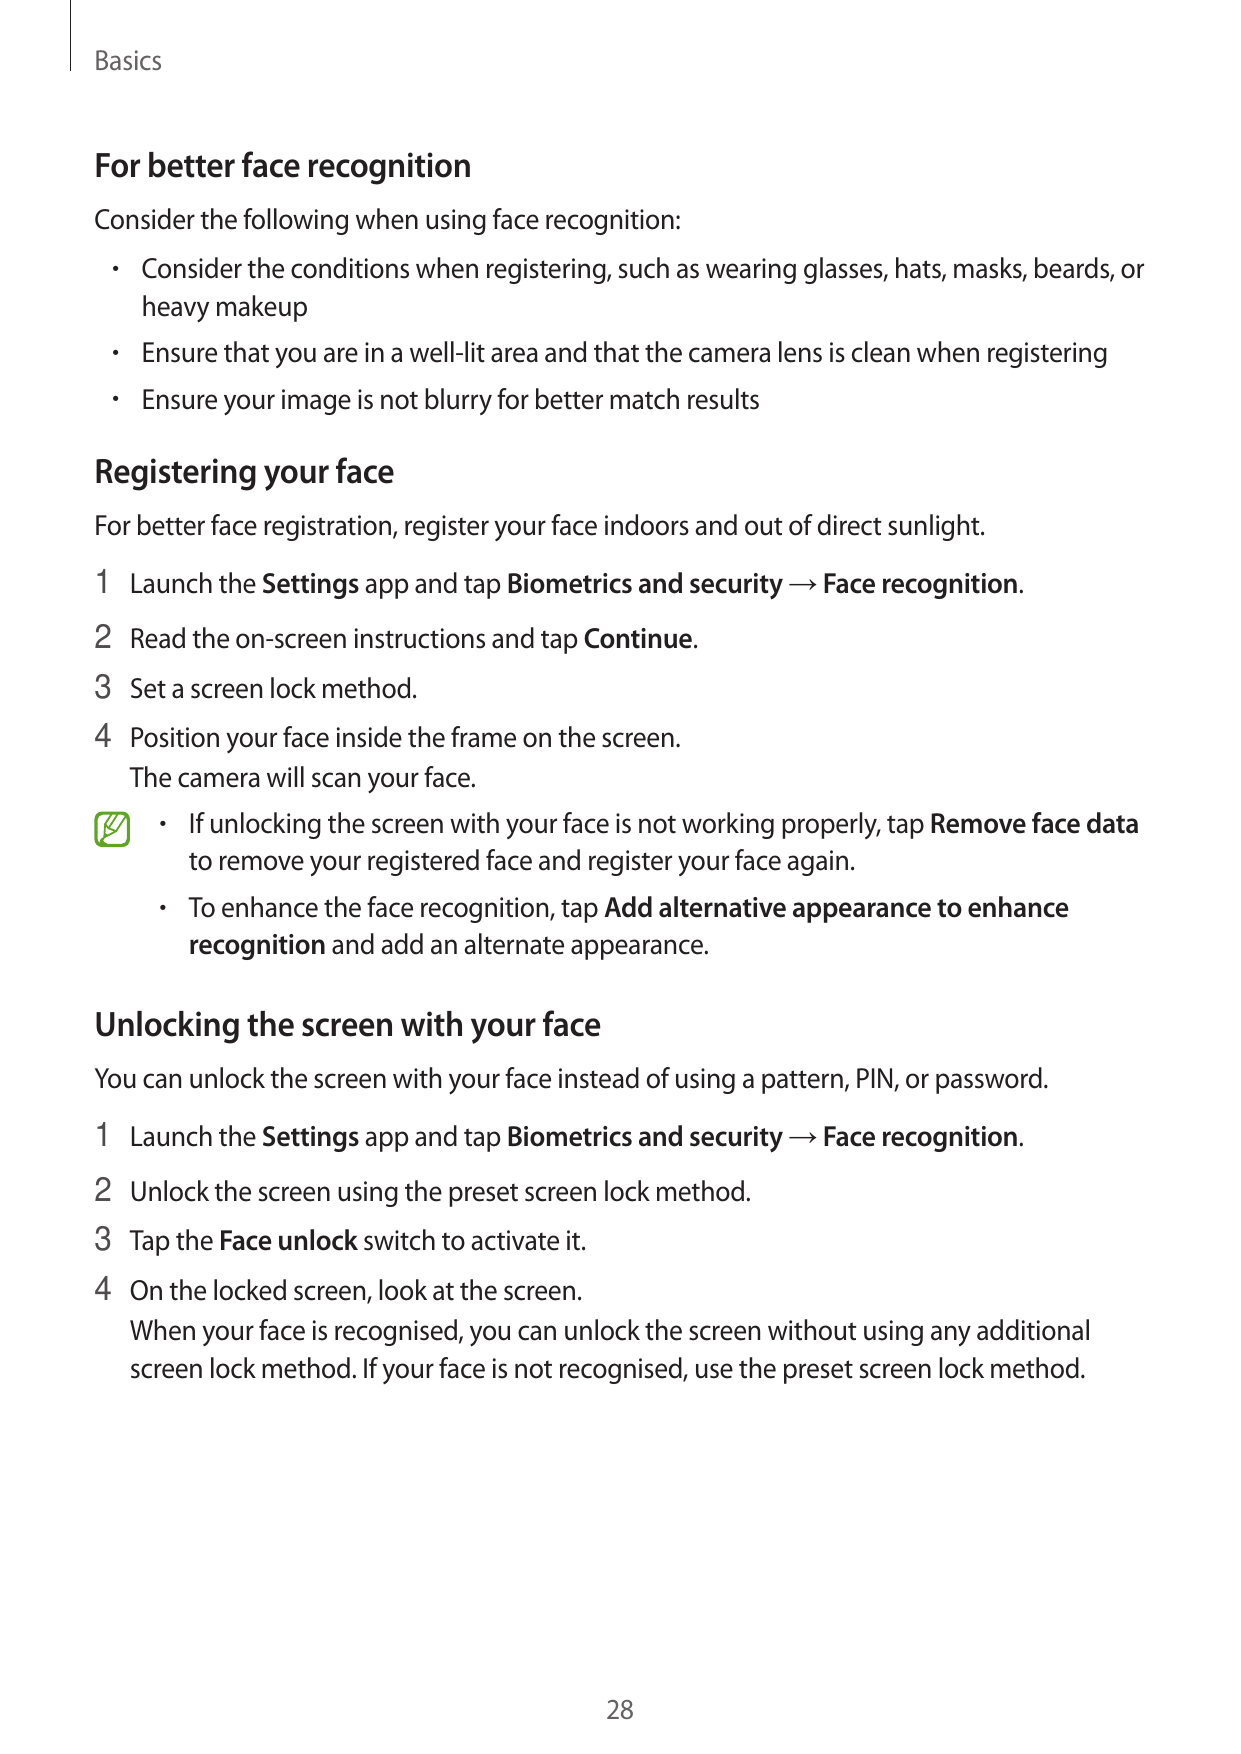 BasicsFor better face recognitionConsider the following when using face recognition:• Consider the conditions when registering, 